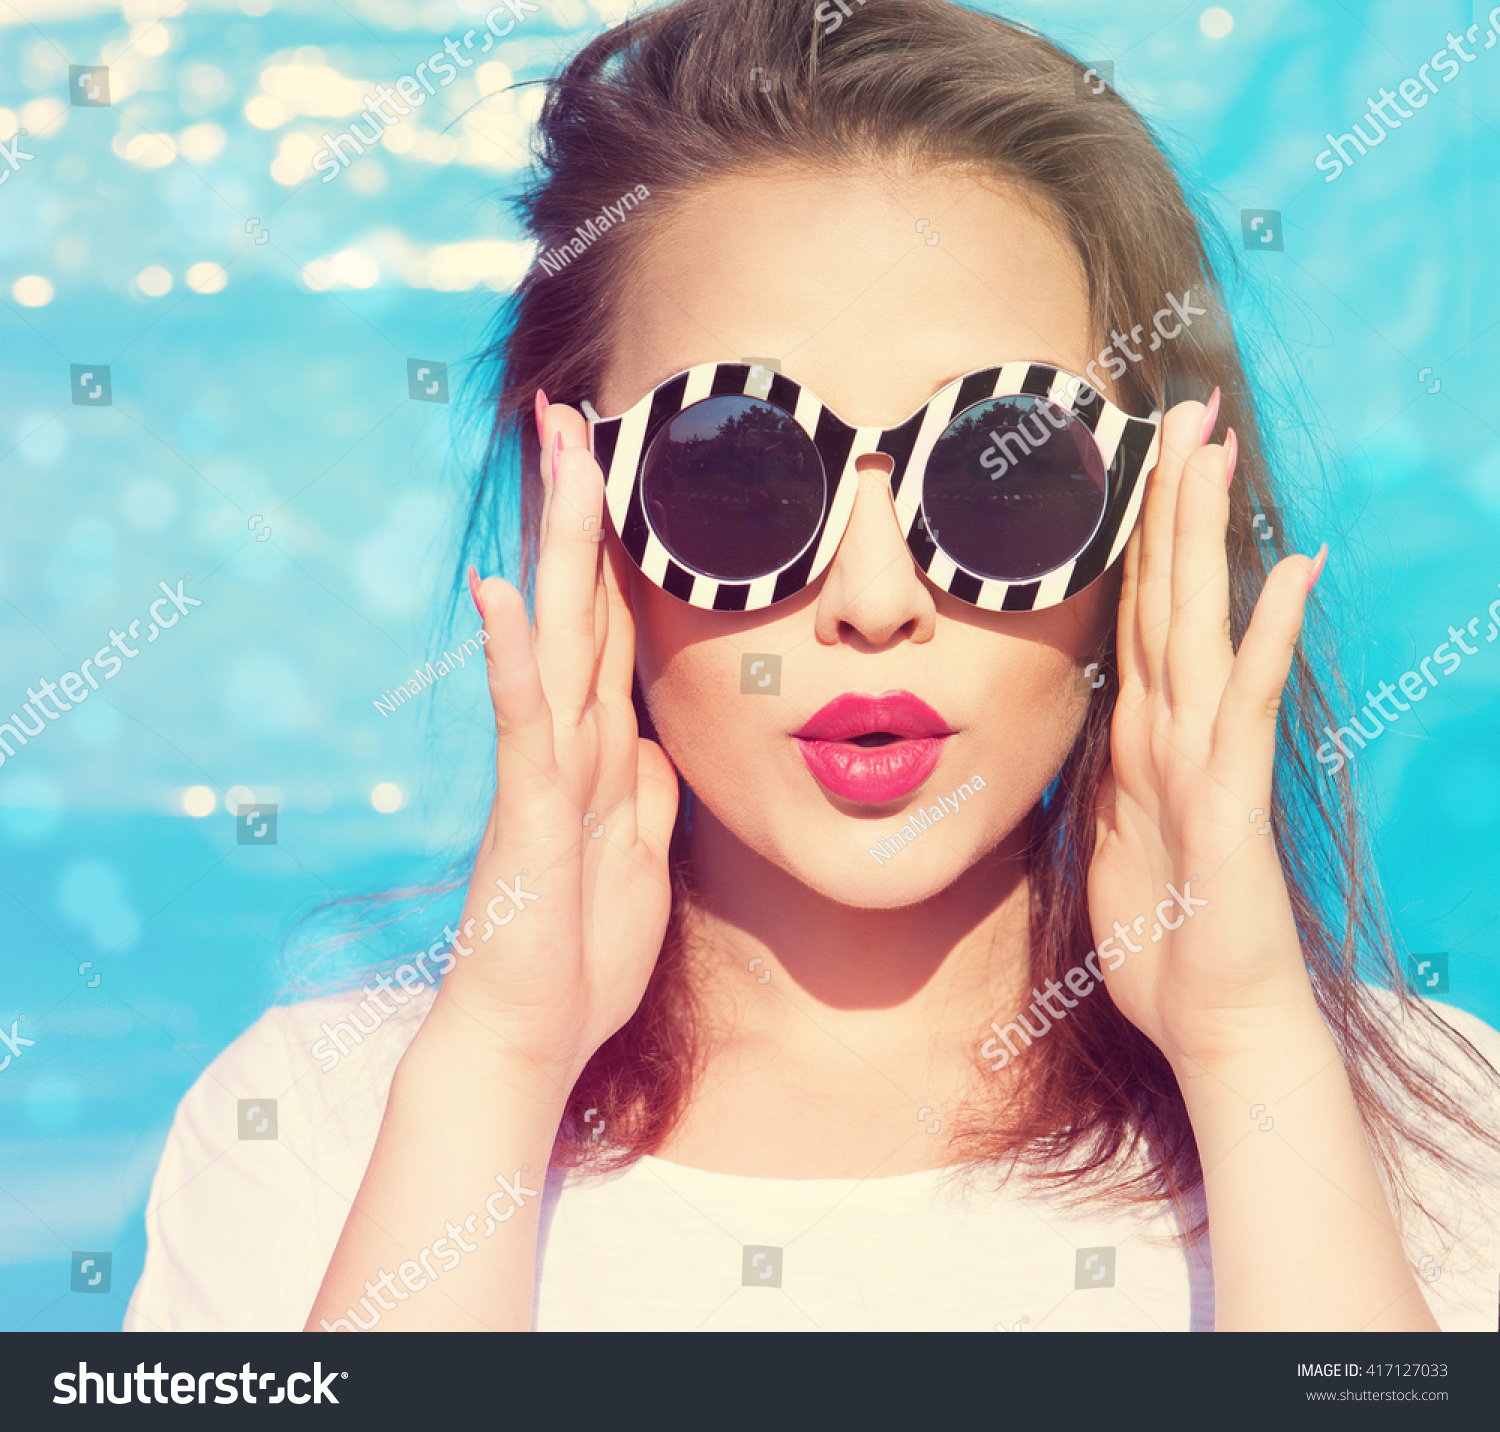 Colorful portrait of young attractive woman wearing sunglasses. Summer beauty  concept #417127033